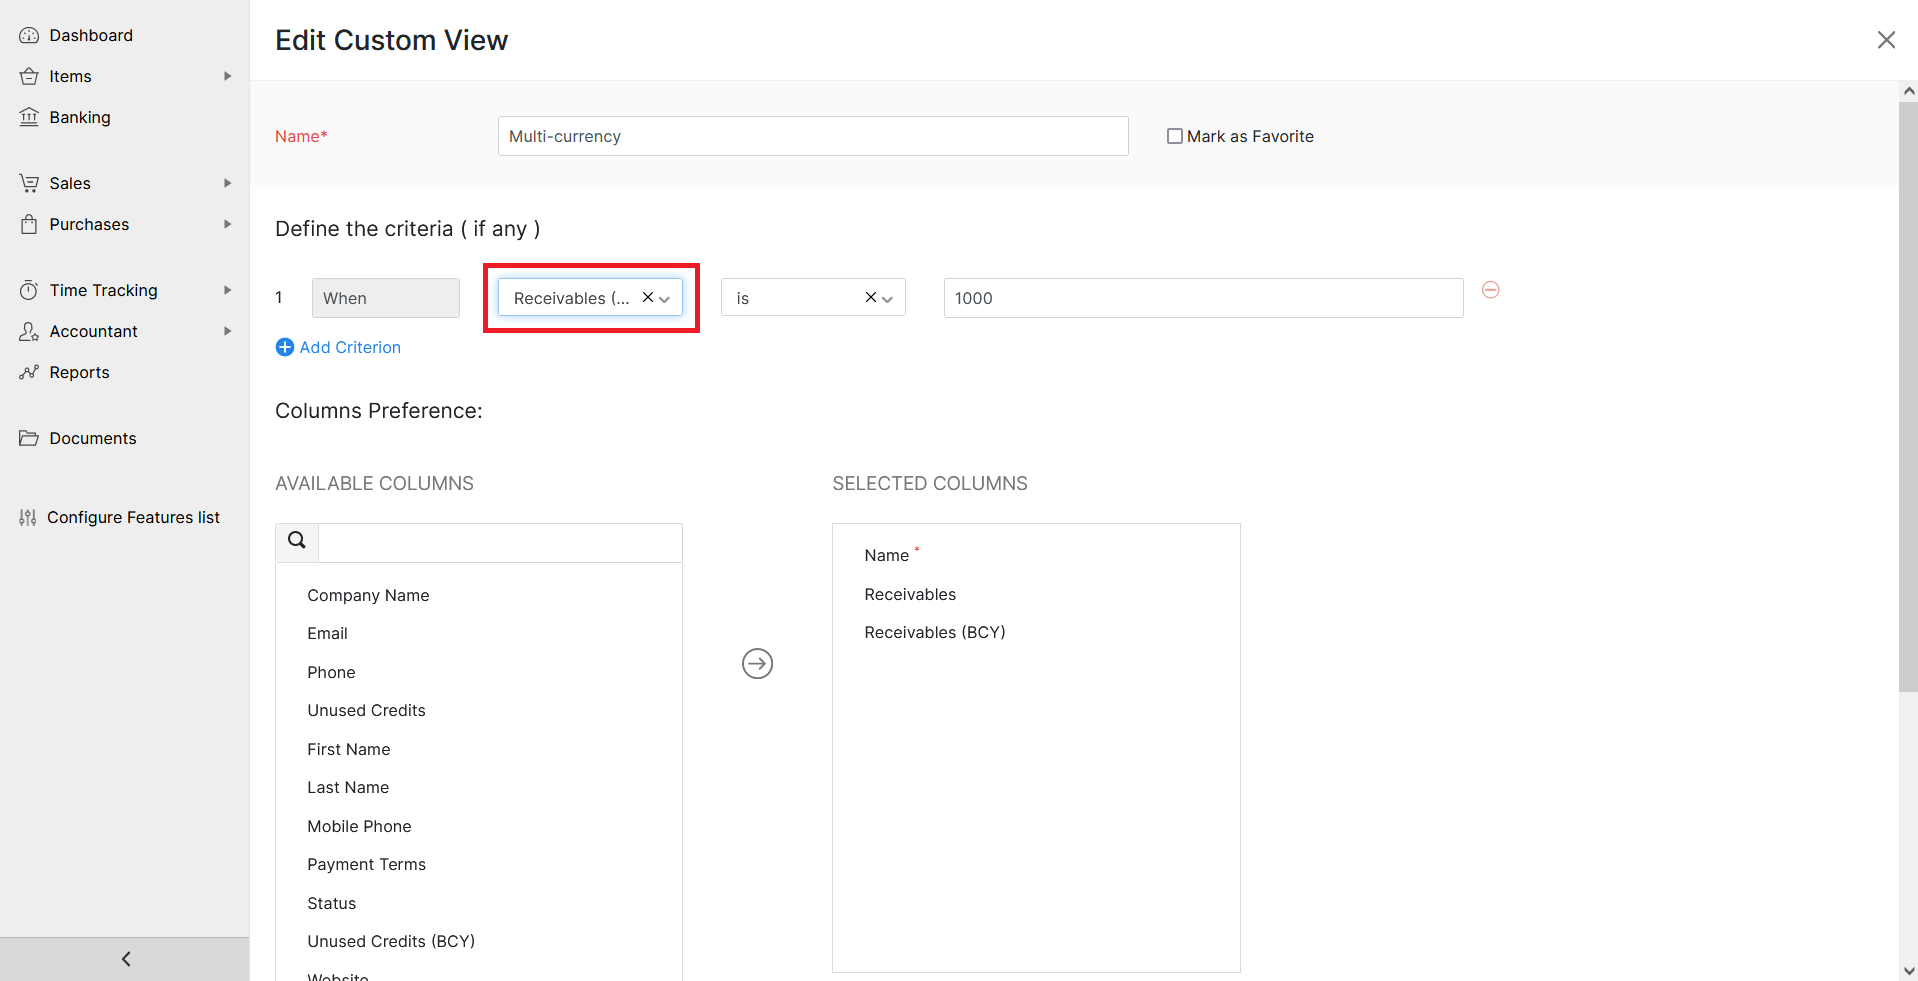 Changing custom view criteria for multi-currency